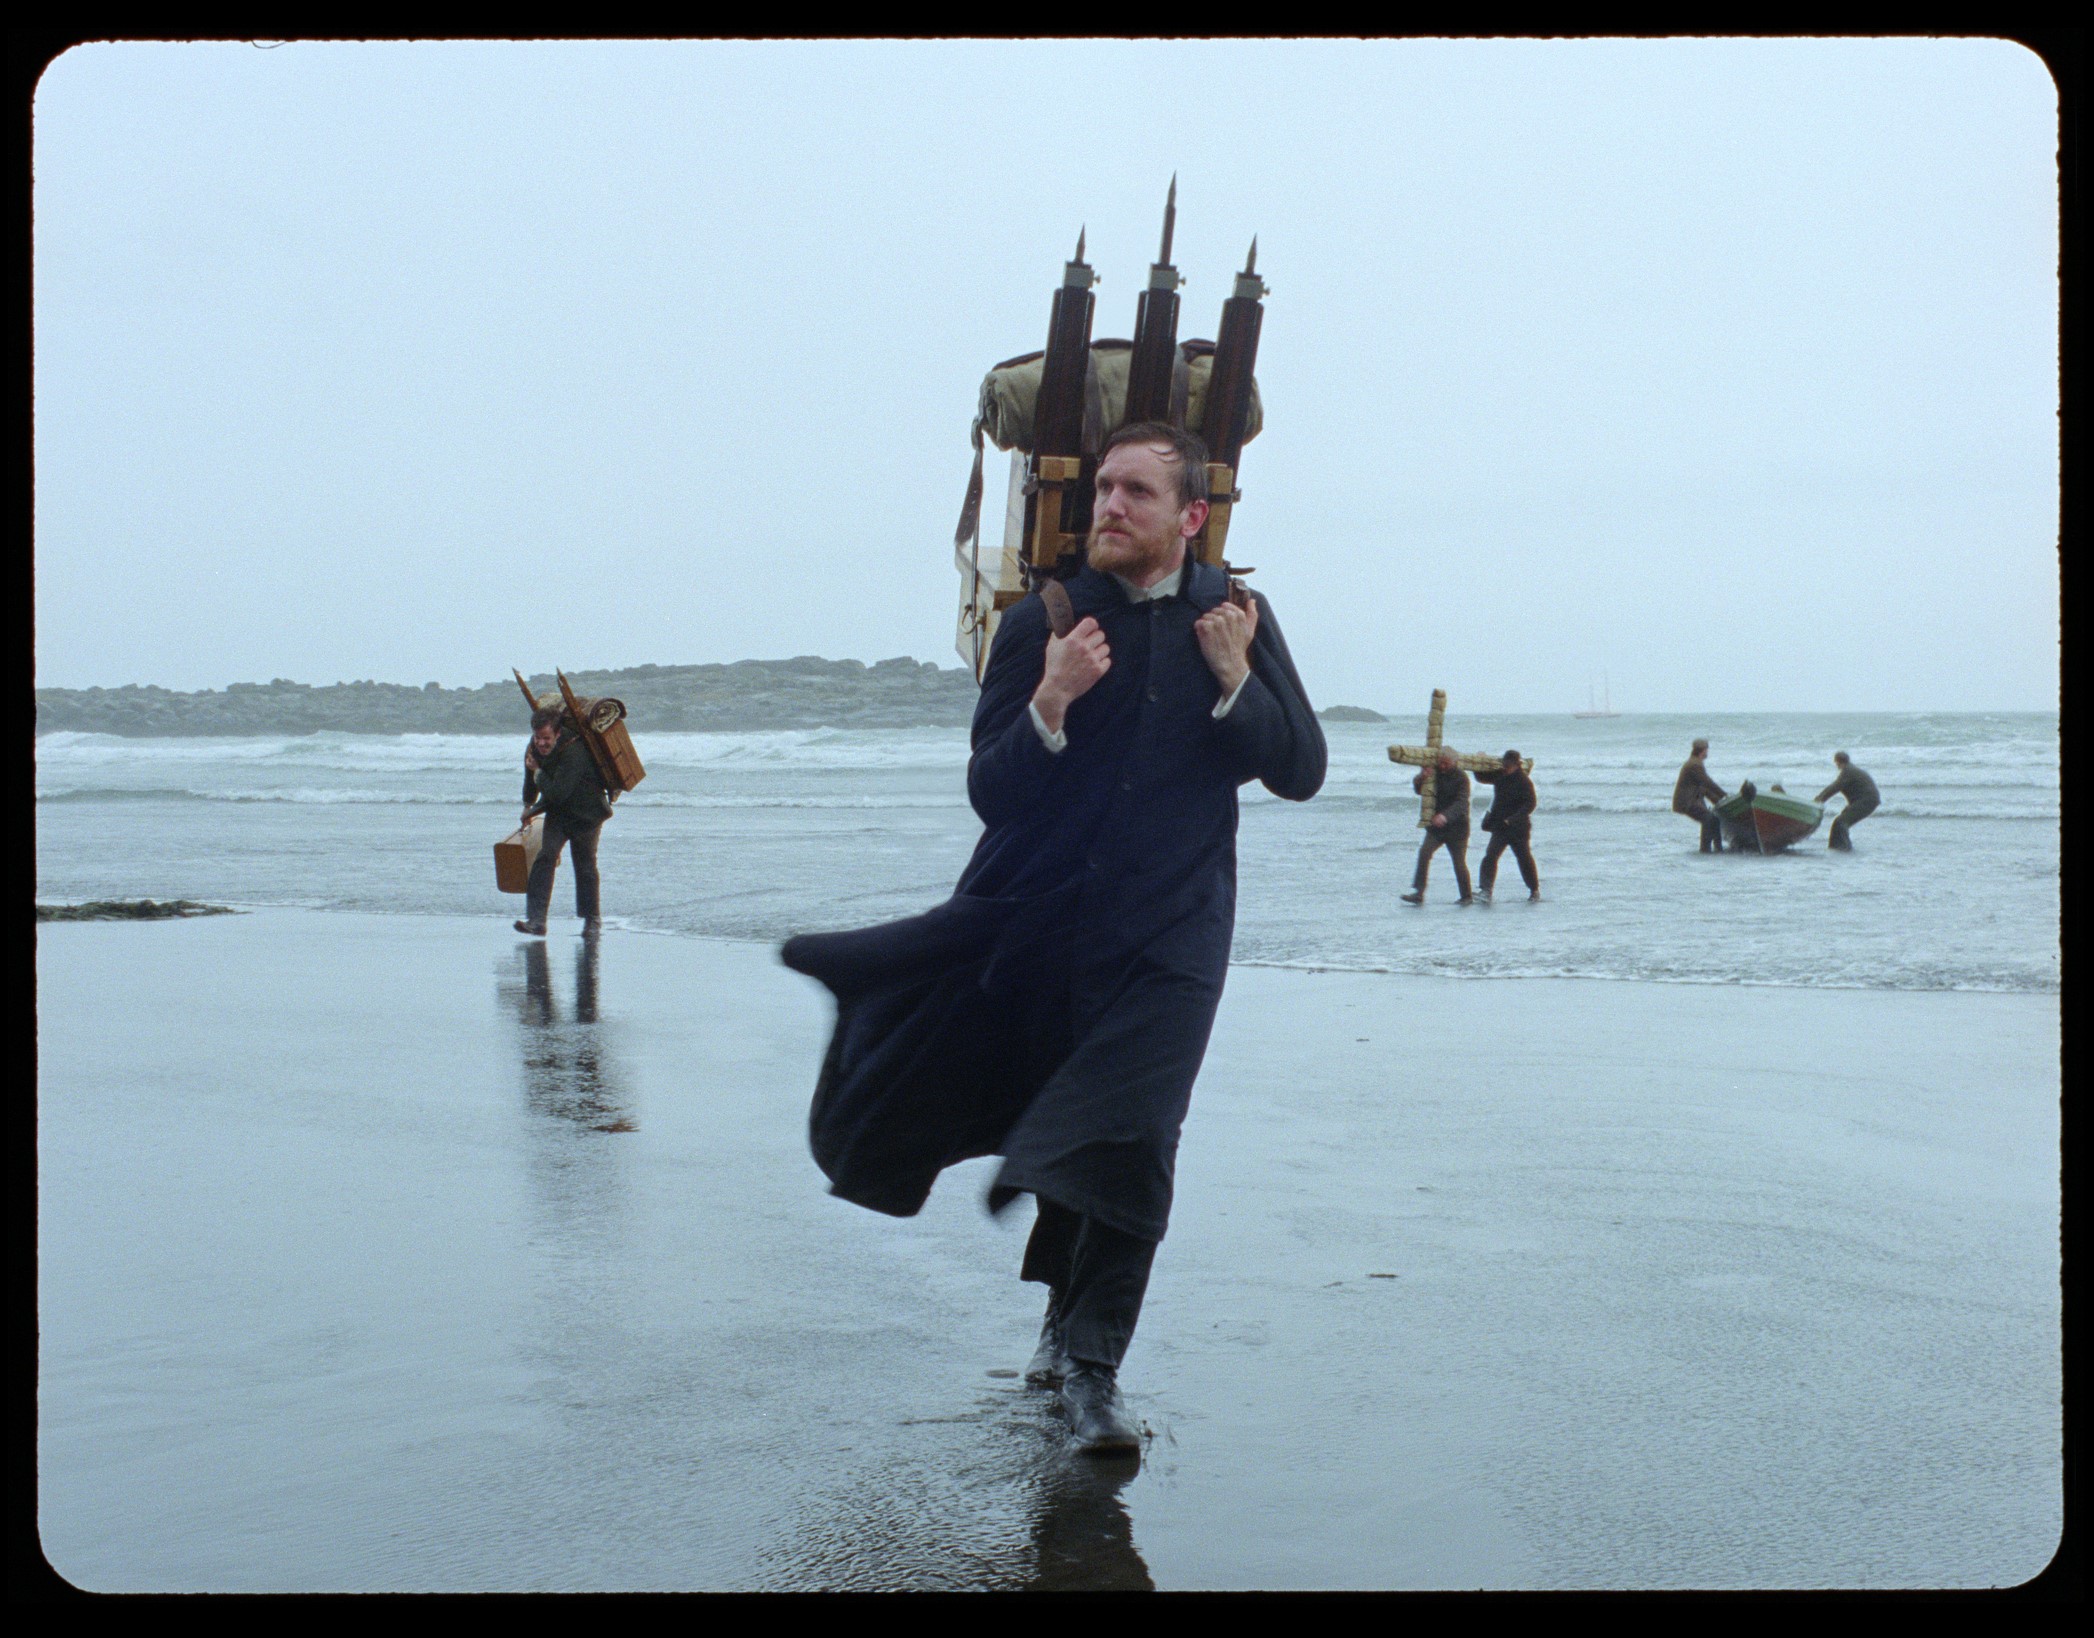 Production photo from the set of Godland the movie, showing the Danish priest arriving on the Icelandic coast